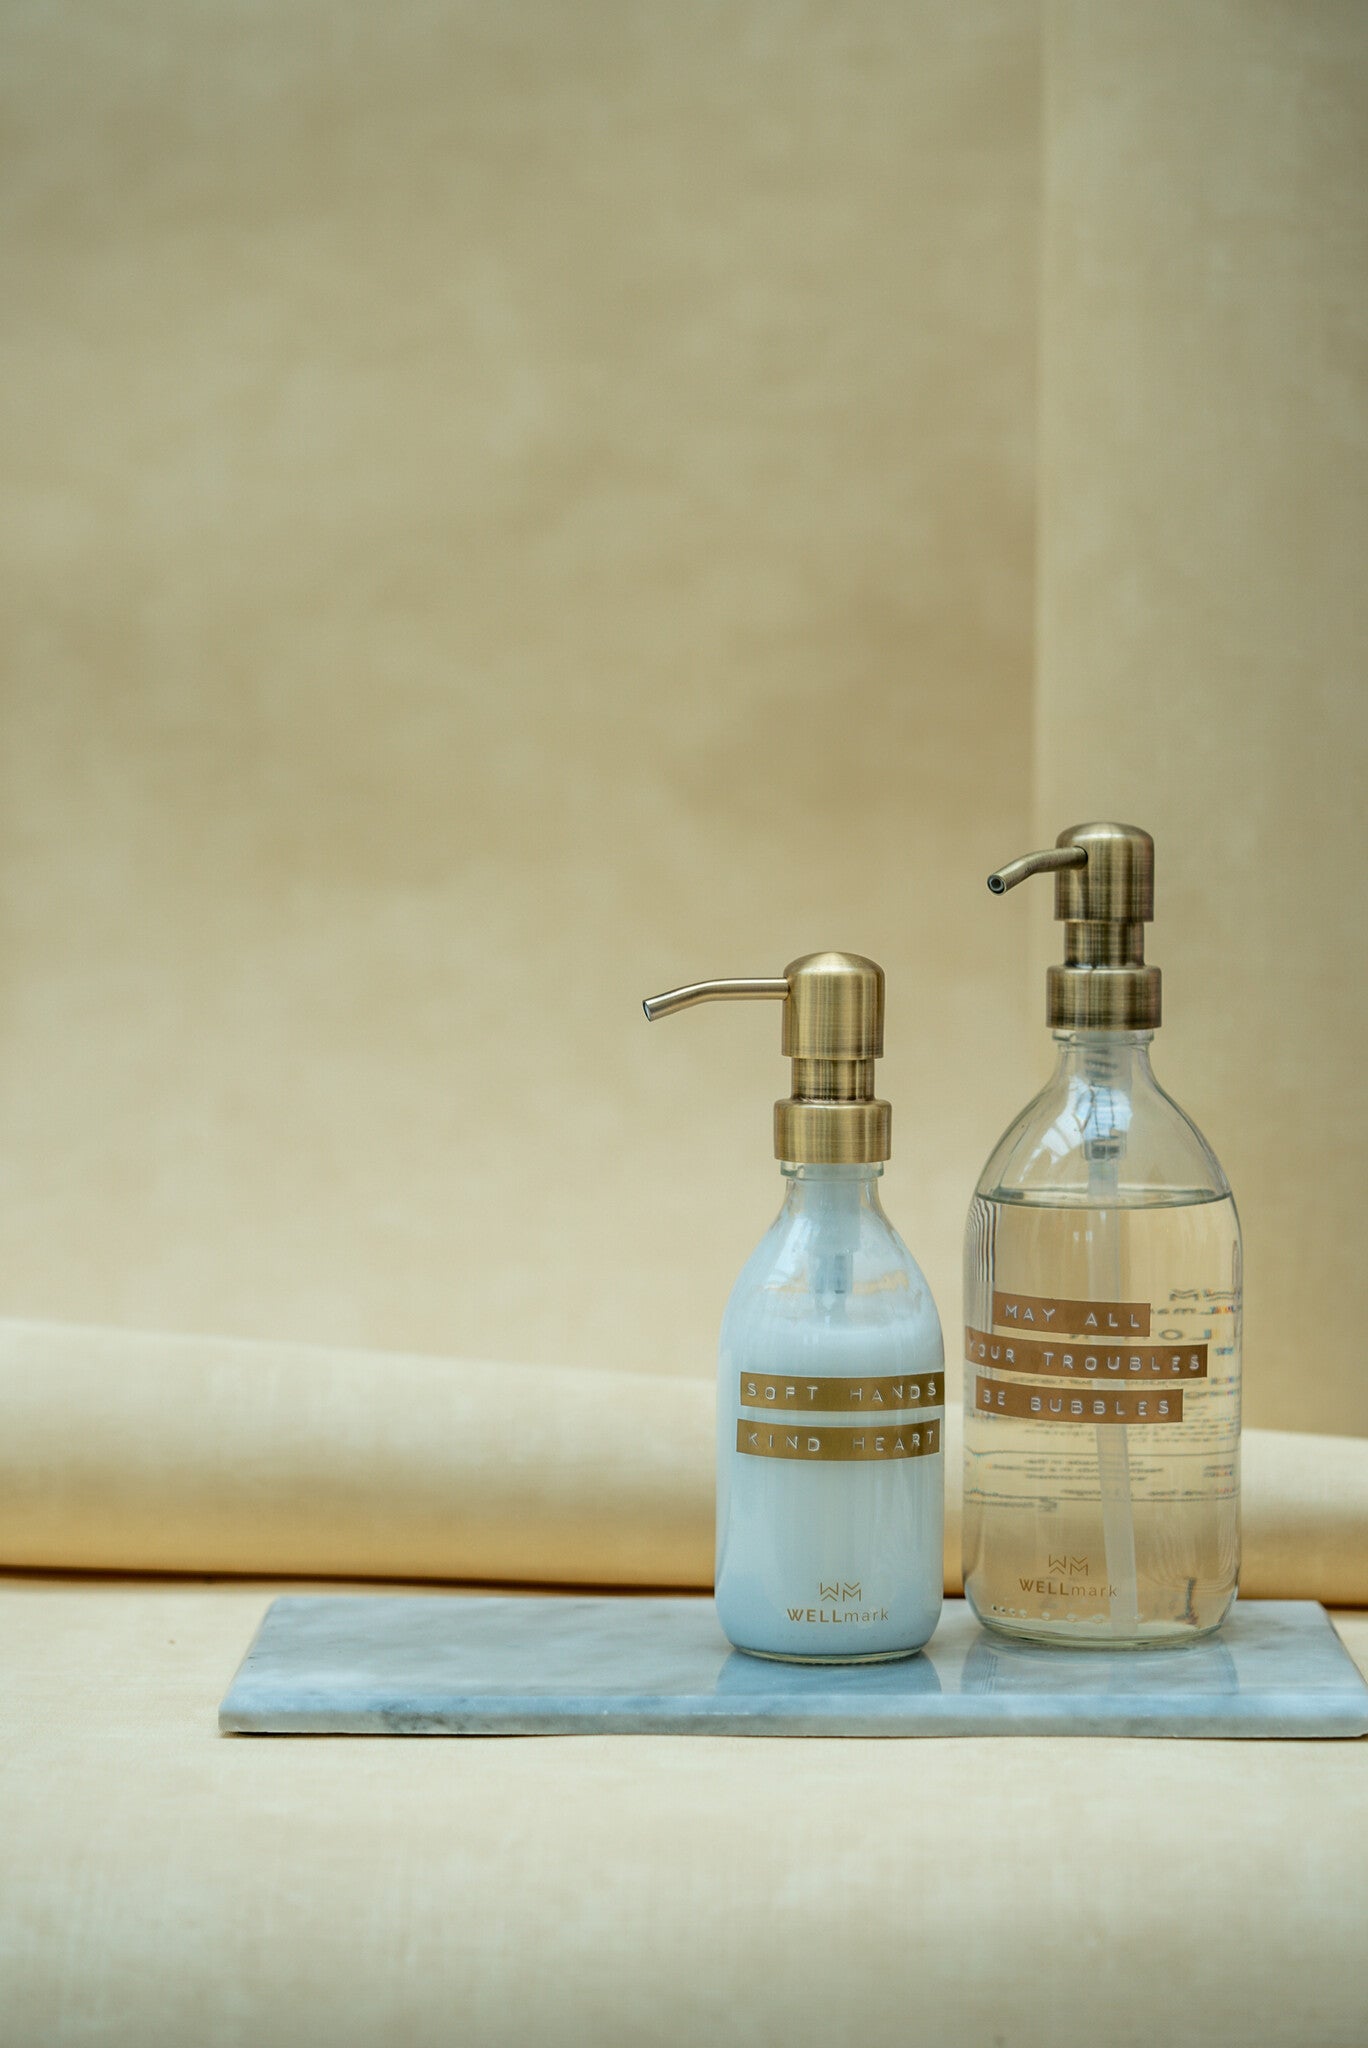 Wellmark - hand soap transparant/brass fresh linen bronze 500ml - may all your troubles